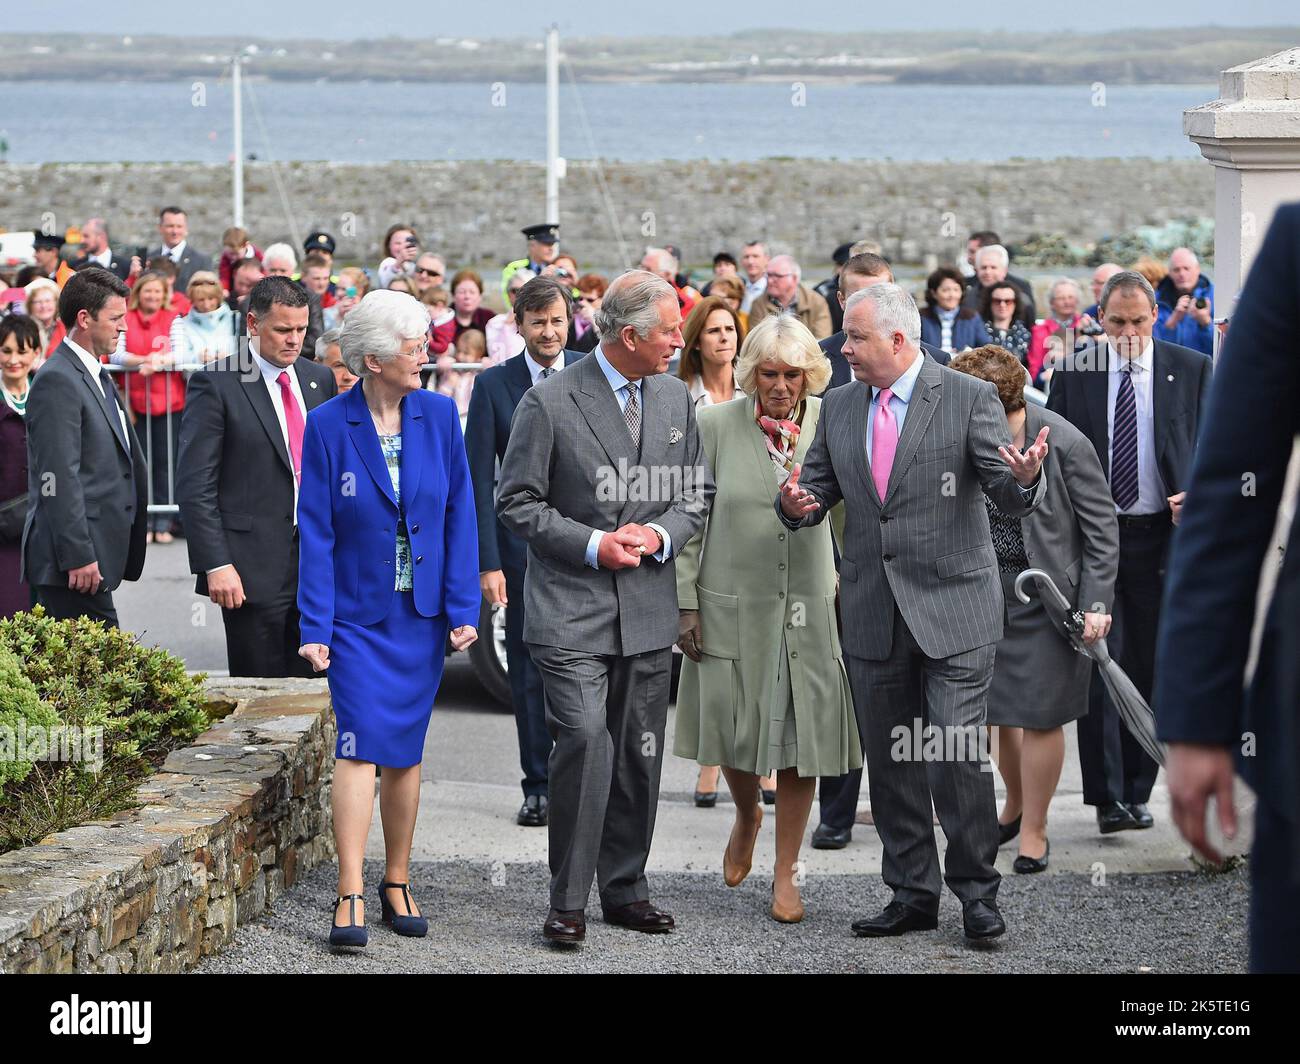 File photo dated 20/05/15 of the King and Queen Consort, the then Prince of Wales and Duchess of Cornwall, meeting members of the local community in the peace garden during a visit to Mullaghmore, Sligo, where Lord Mountbatten was killed whilst on his boat. The King has sent a message of condolence to the President of Ireland following the deaths of 10 people in an explosion at a petrol station in Co Donegal. Issue date: Monday October 10, 2022. Stock Photo